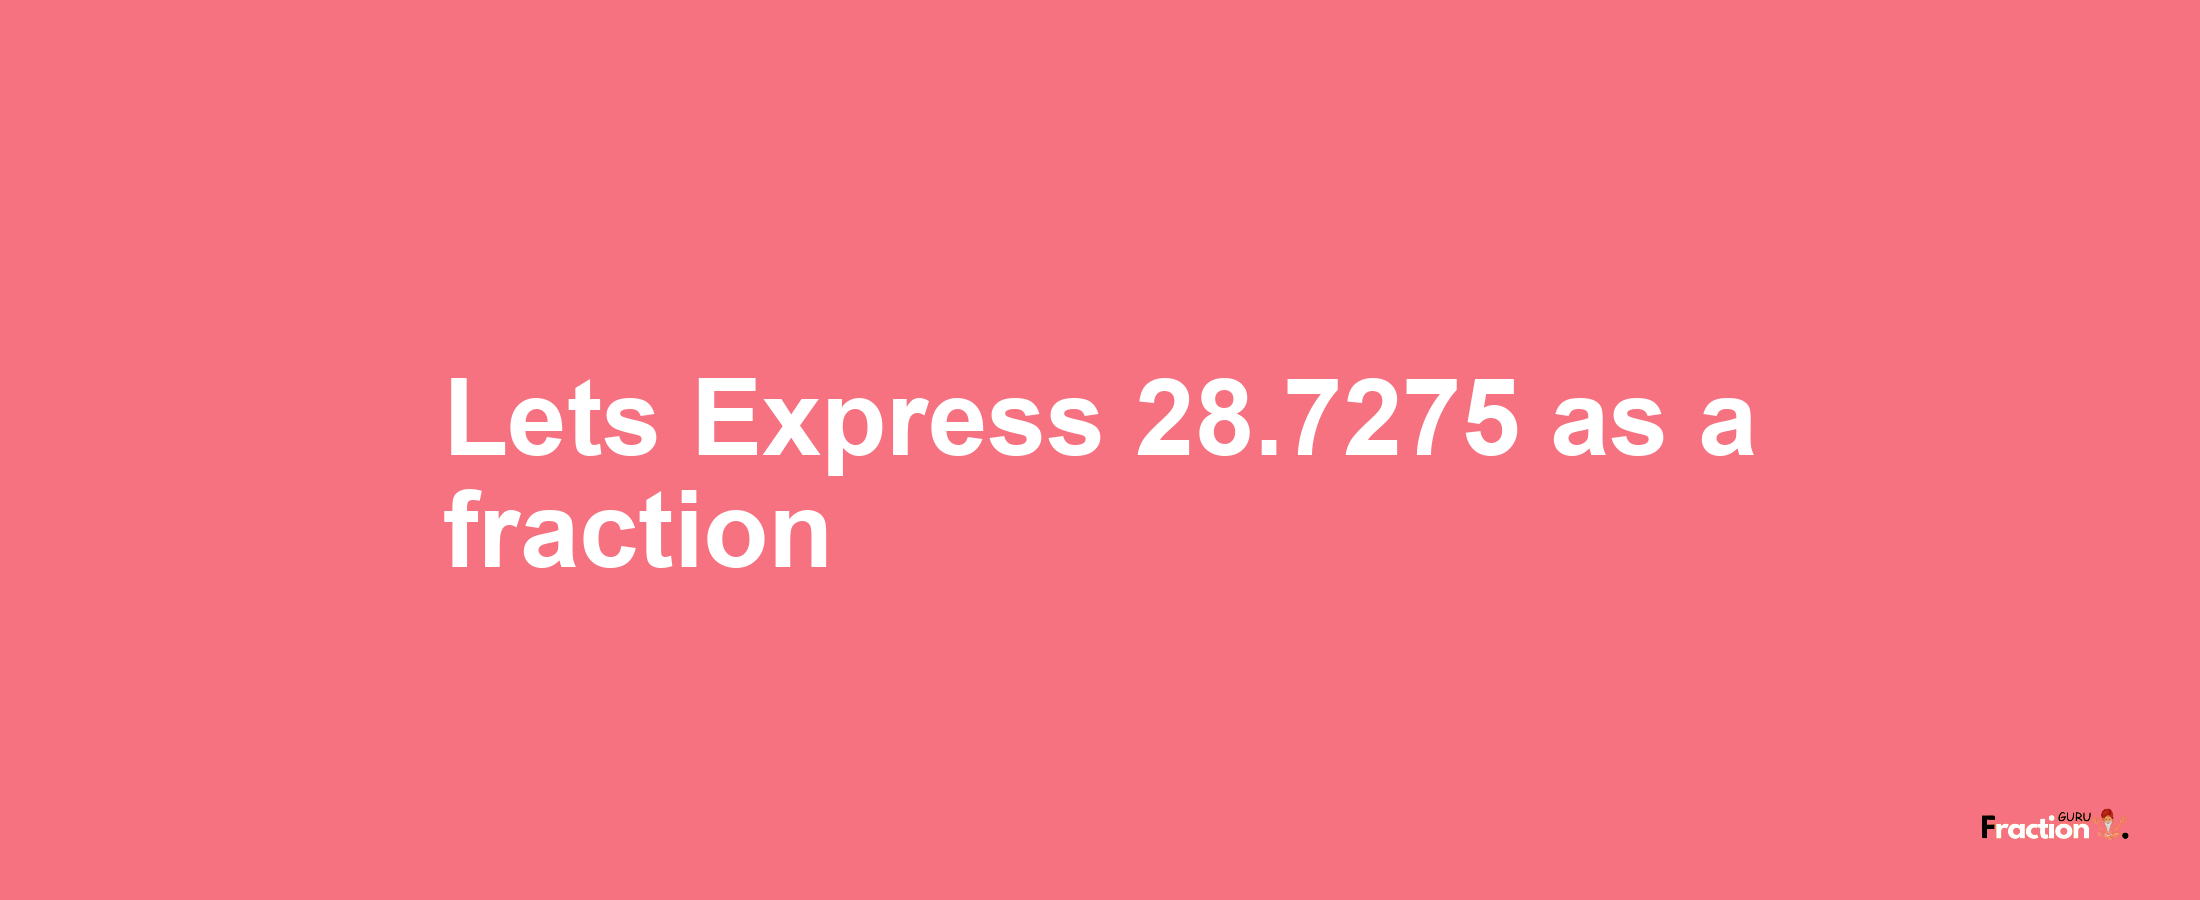 Lets Express 28.7275 as afraction